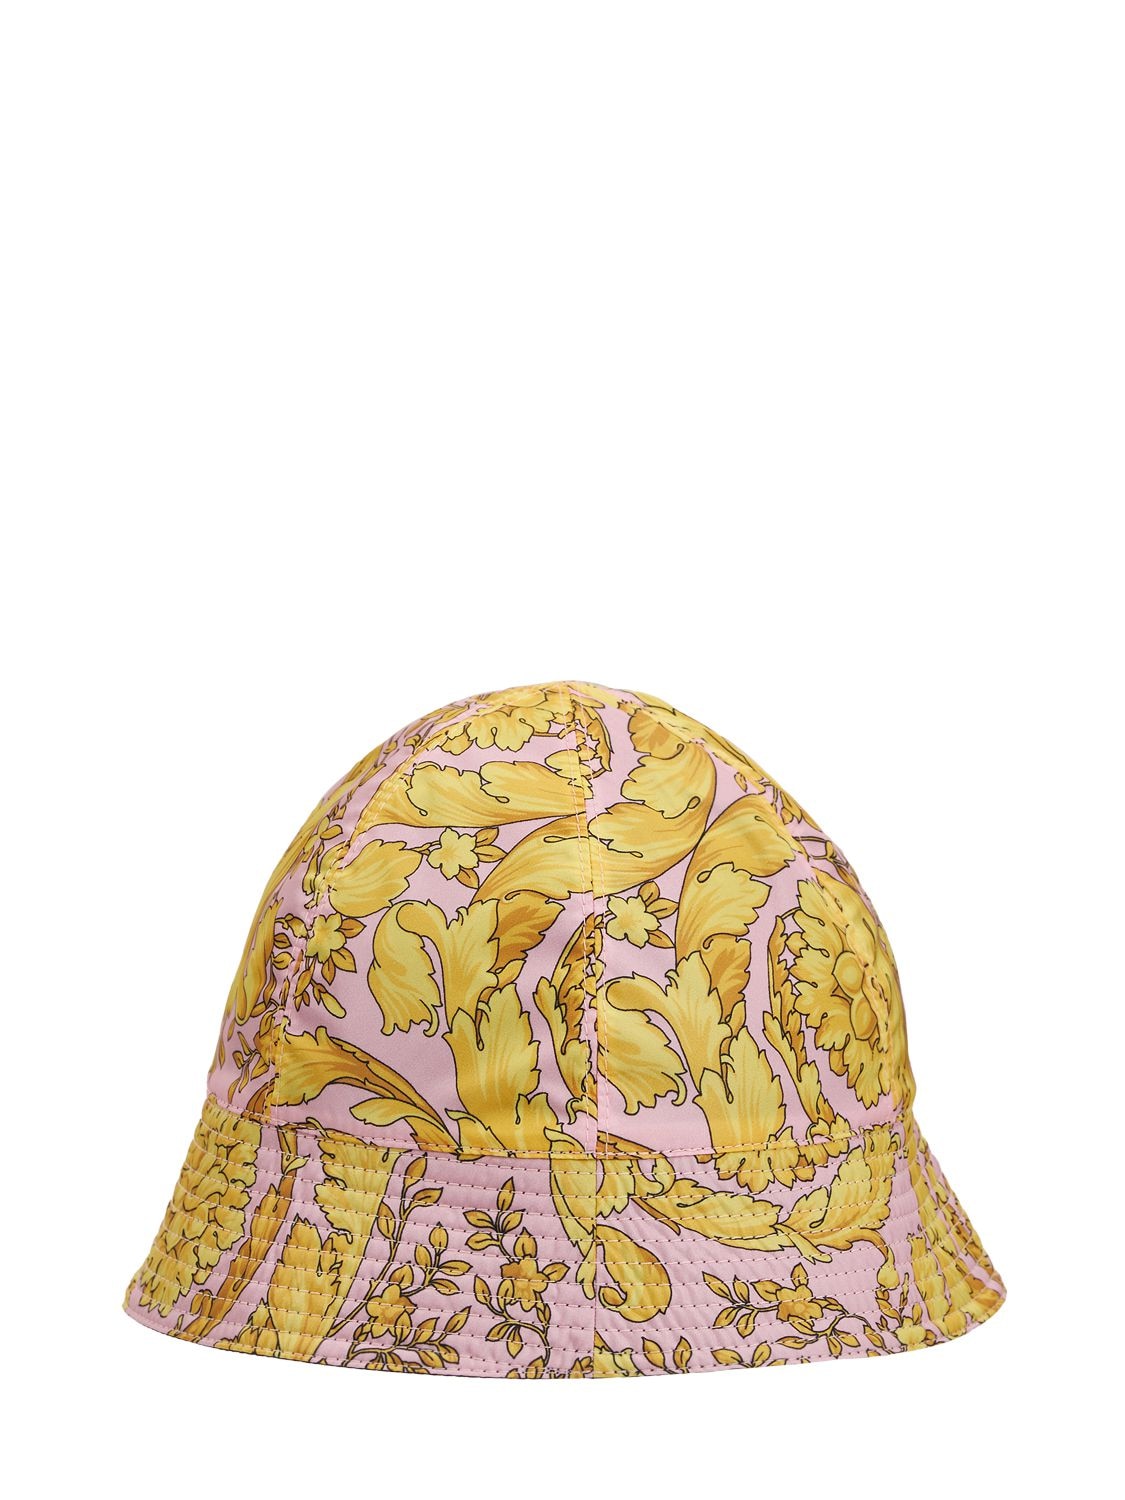 Versace '92 Baroque Printed Nylon Bucket Hat In Candy,gold